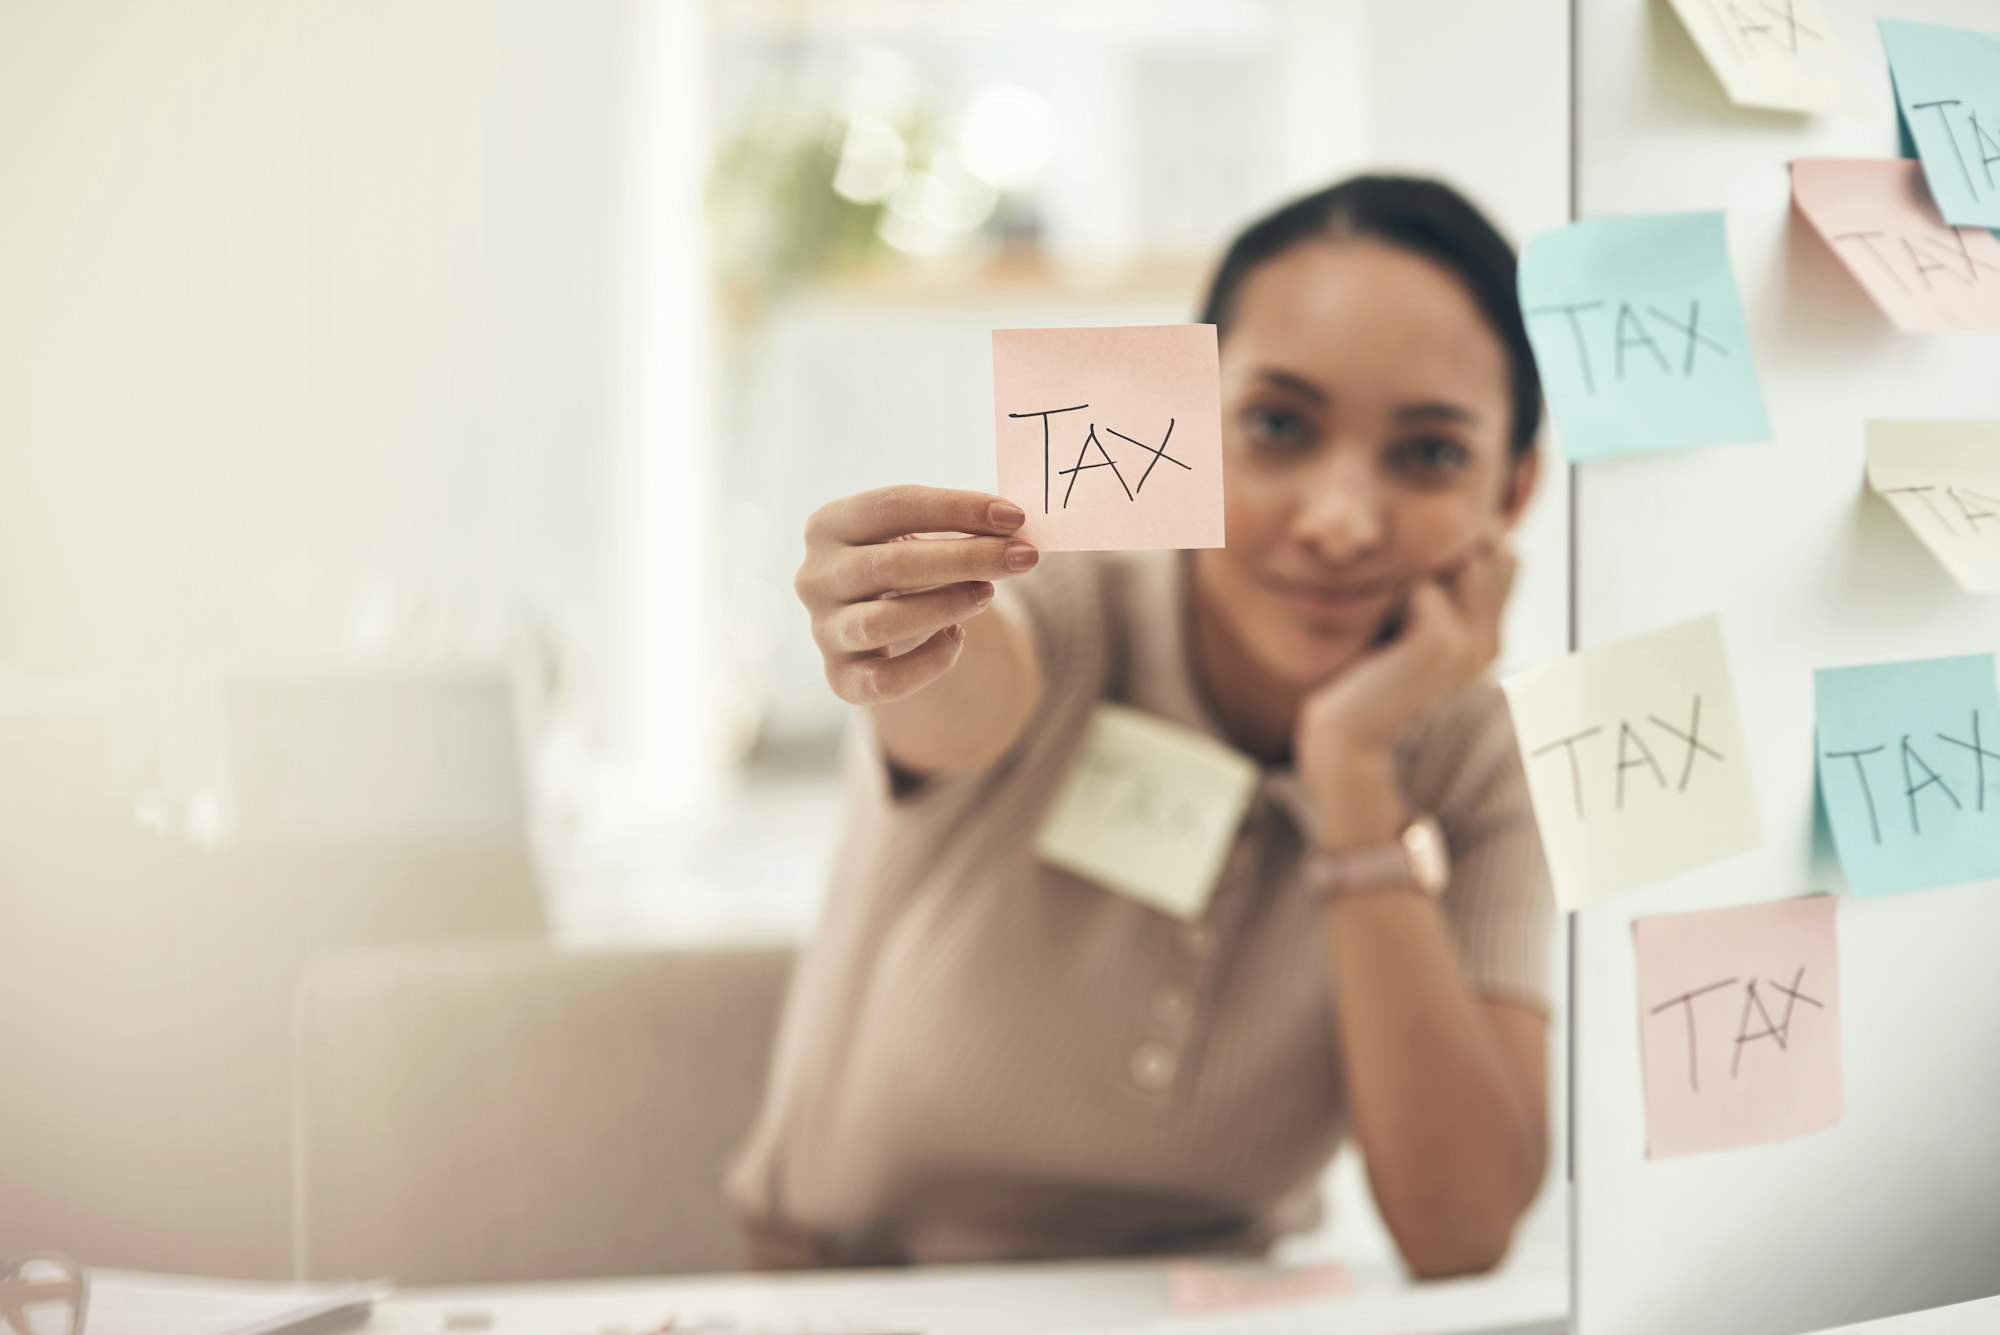 tax preparation outsourcing